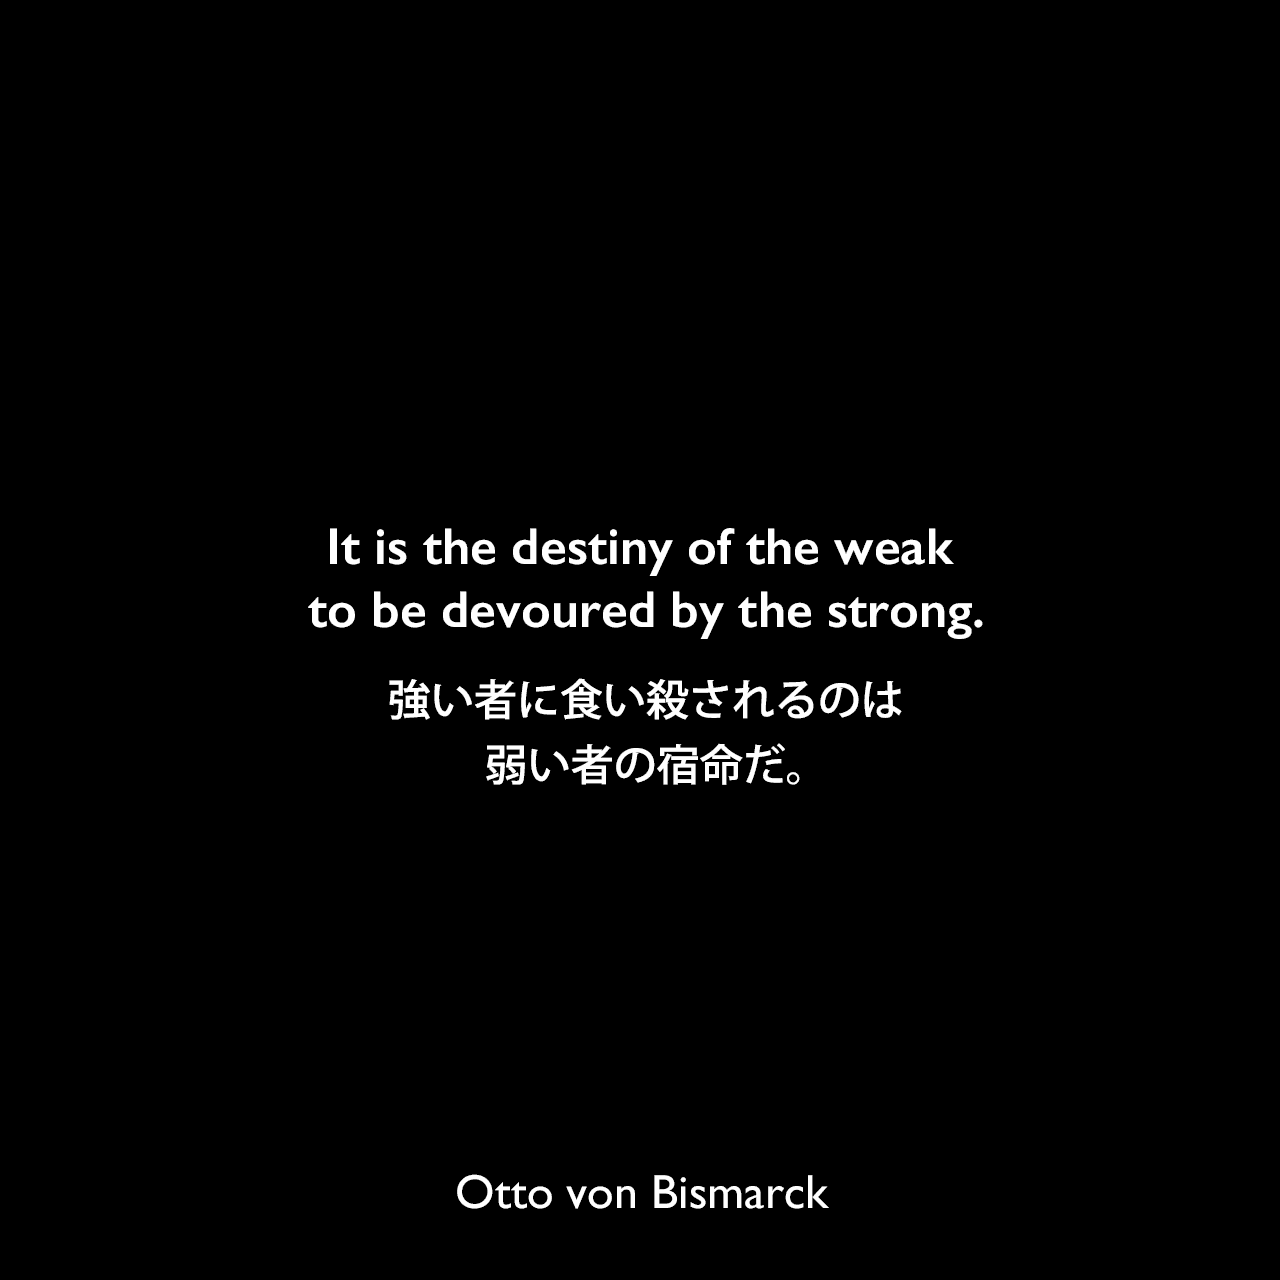 It is the destiny of the weak to be devoured by the strong.強い者に食い殺されるのは弱い者の宿命だ。Otto von Bismarck